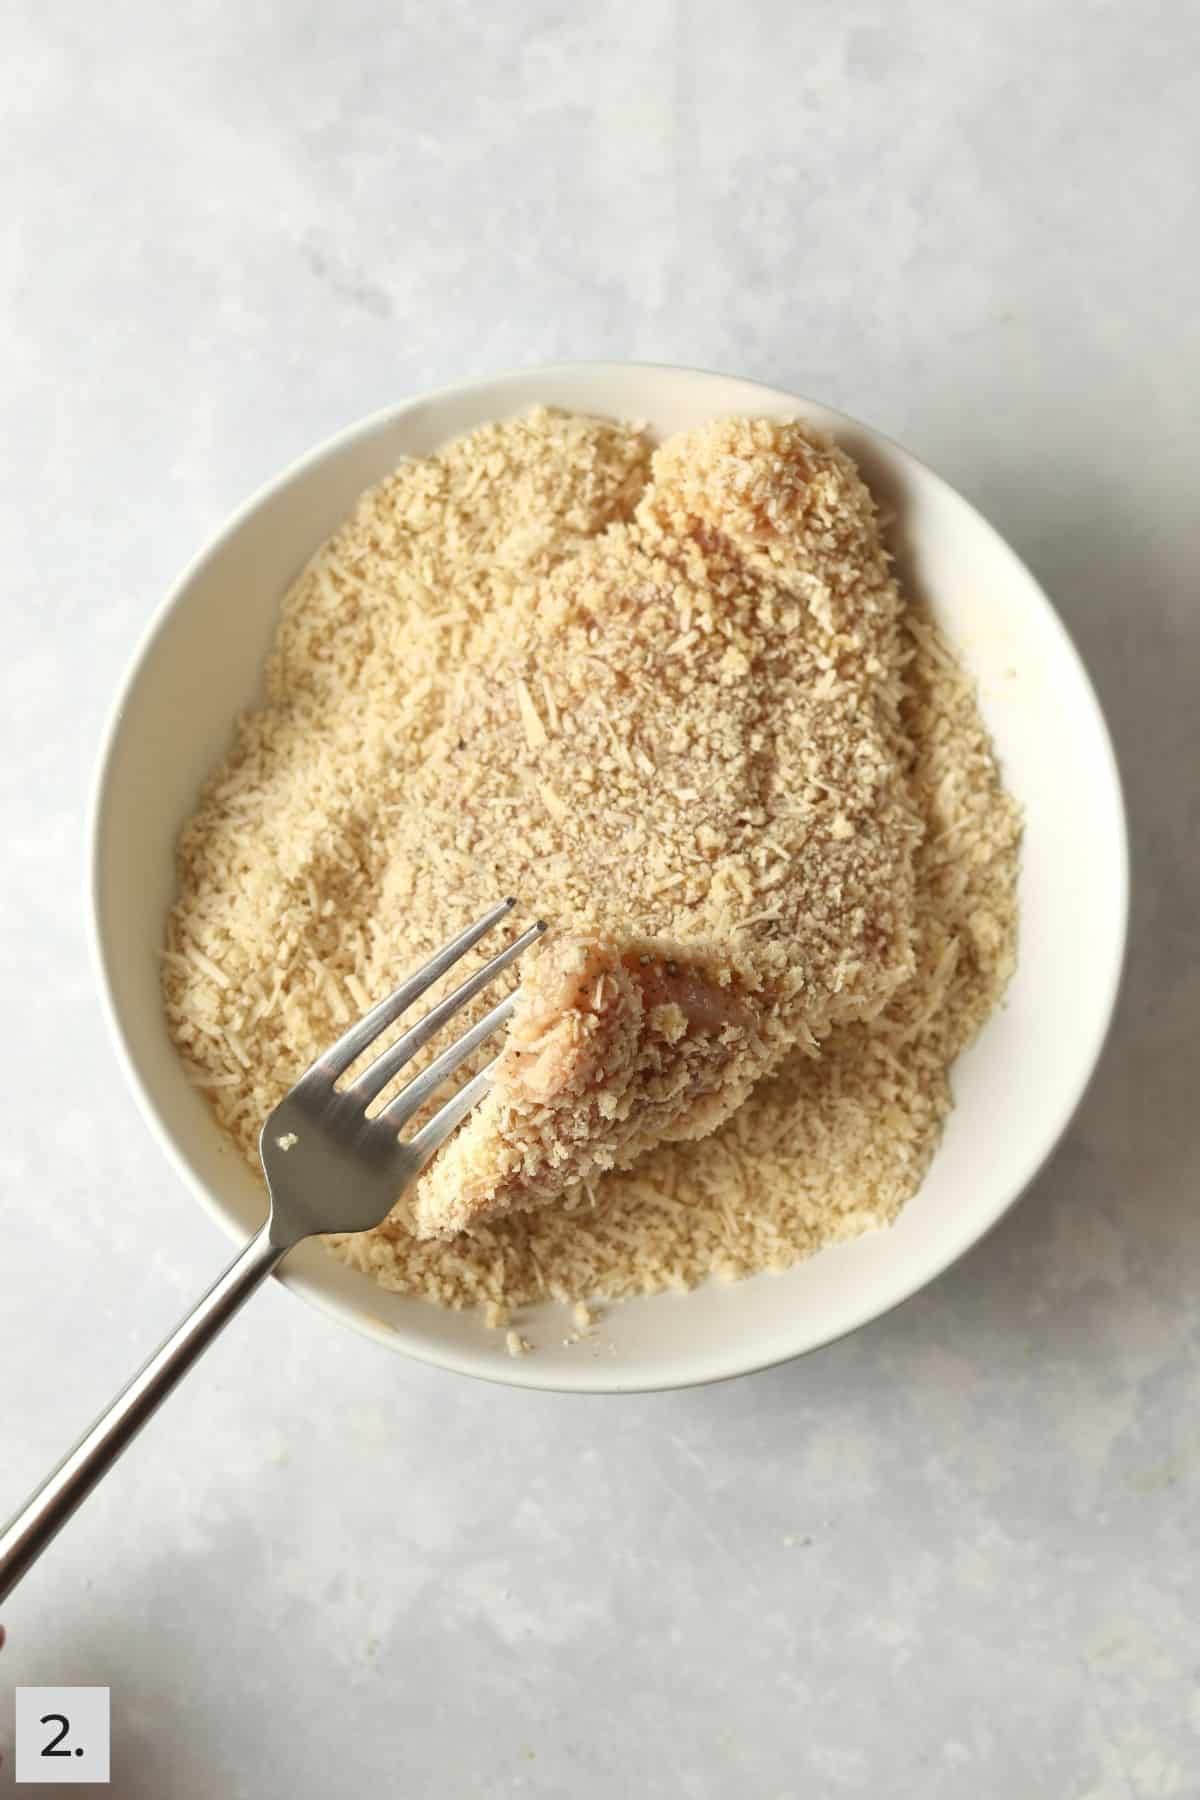 Piece of chicken being breaded in a parmesan mixture.